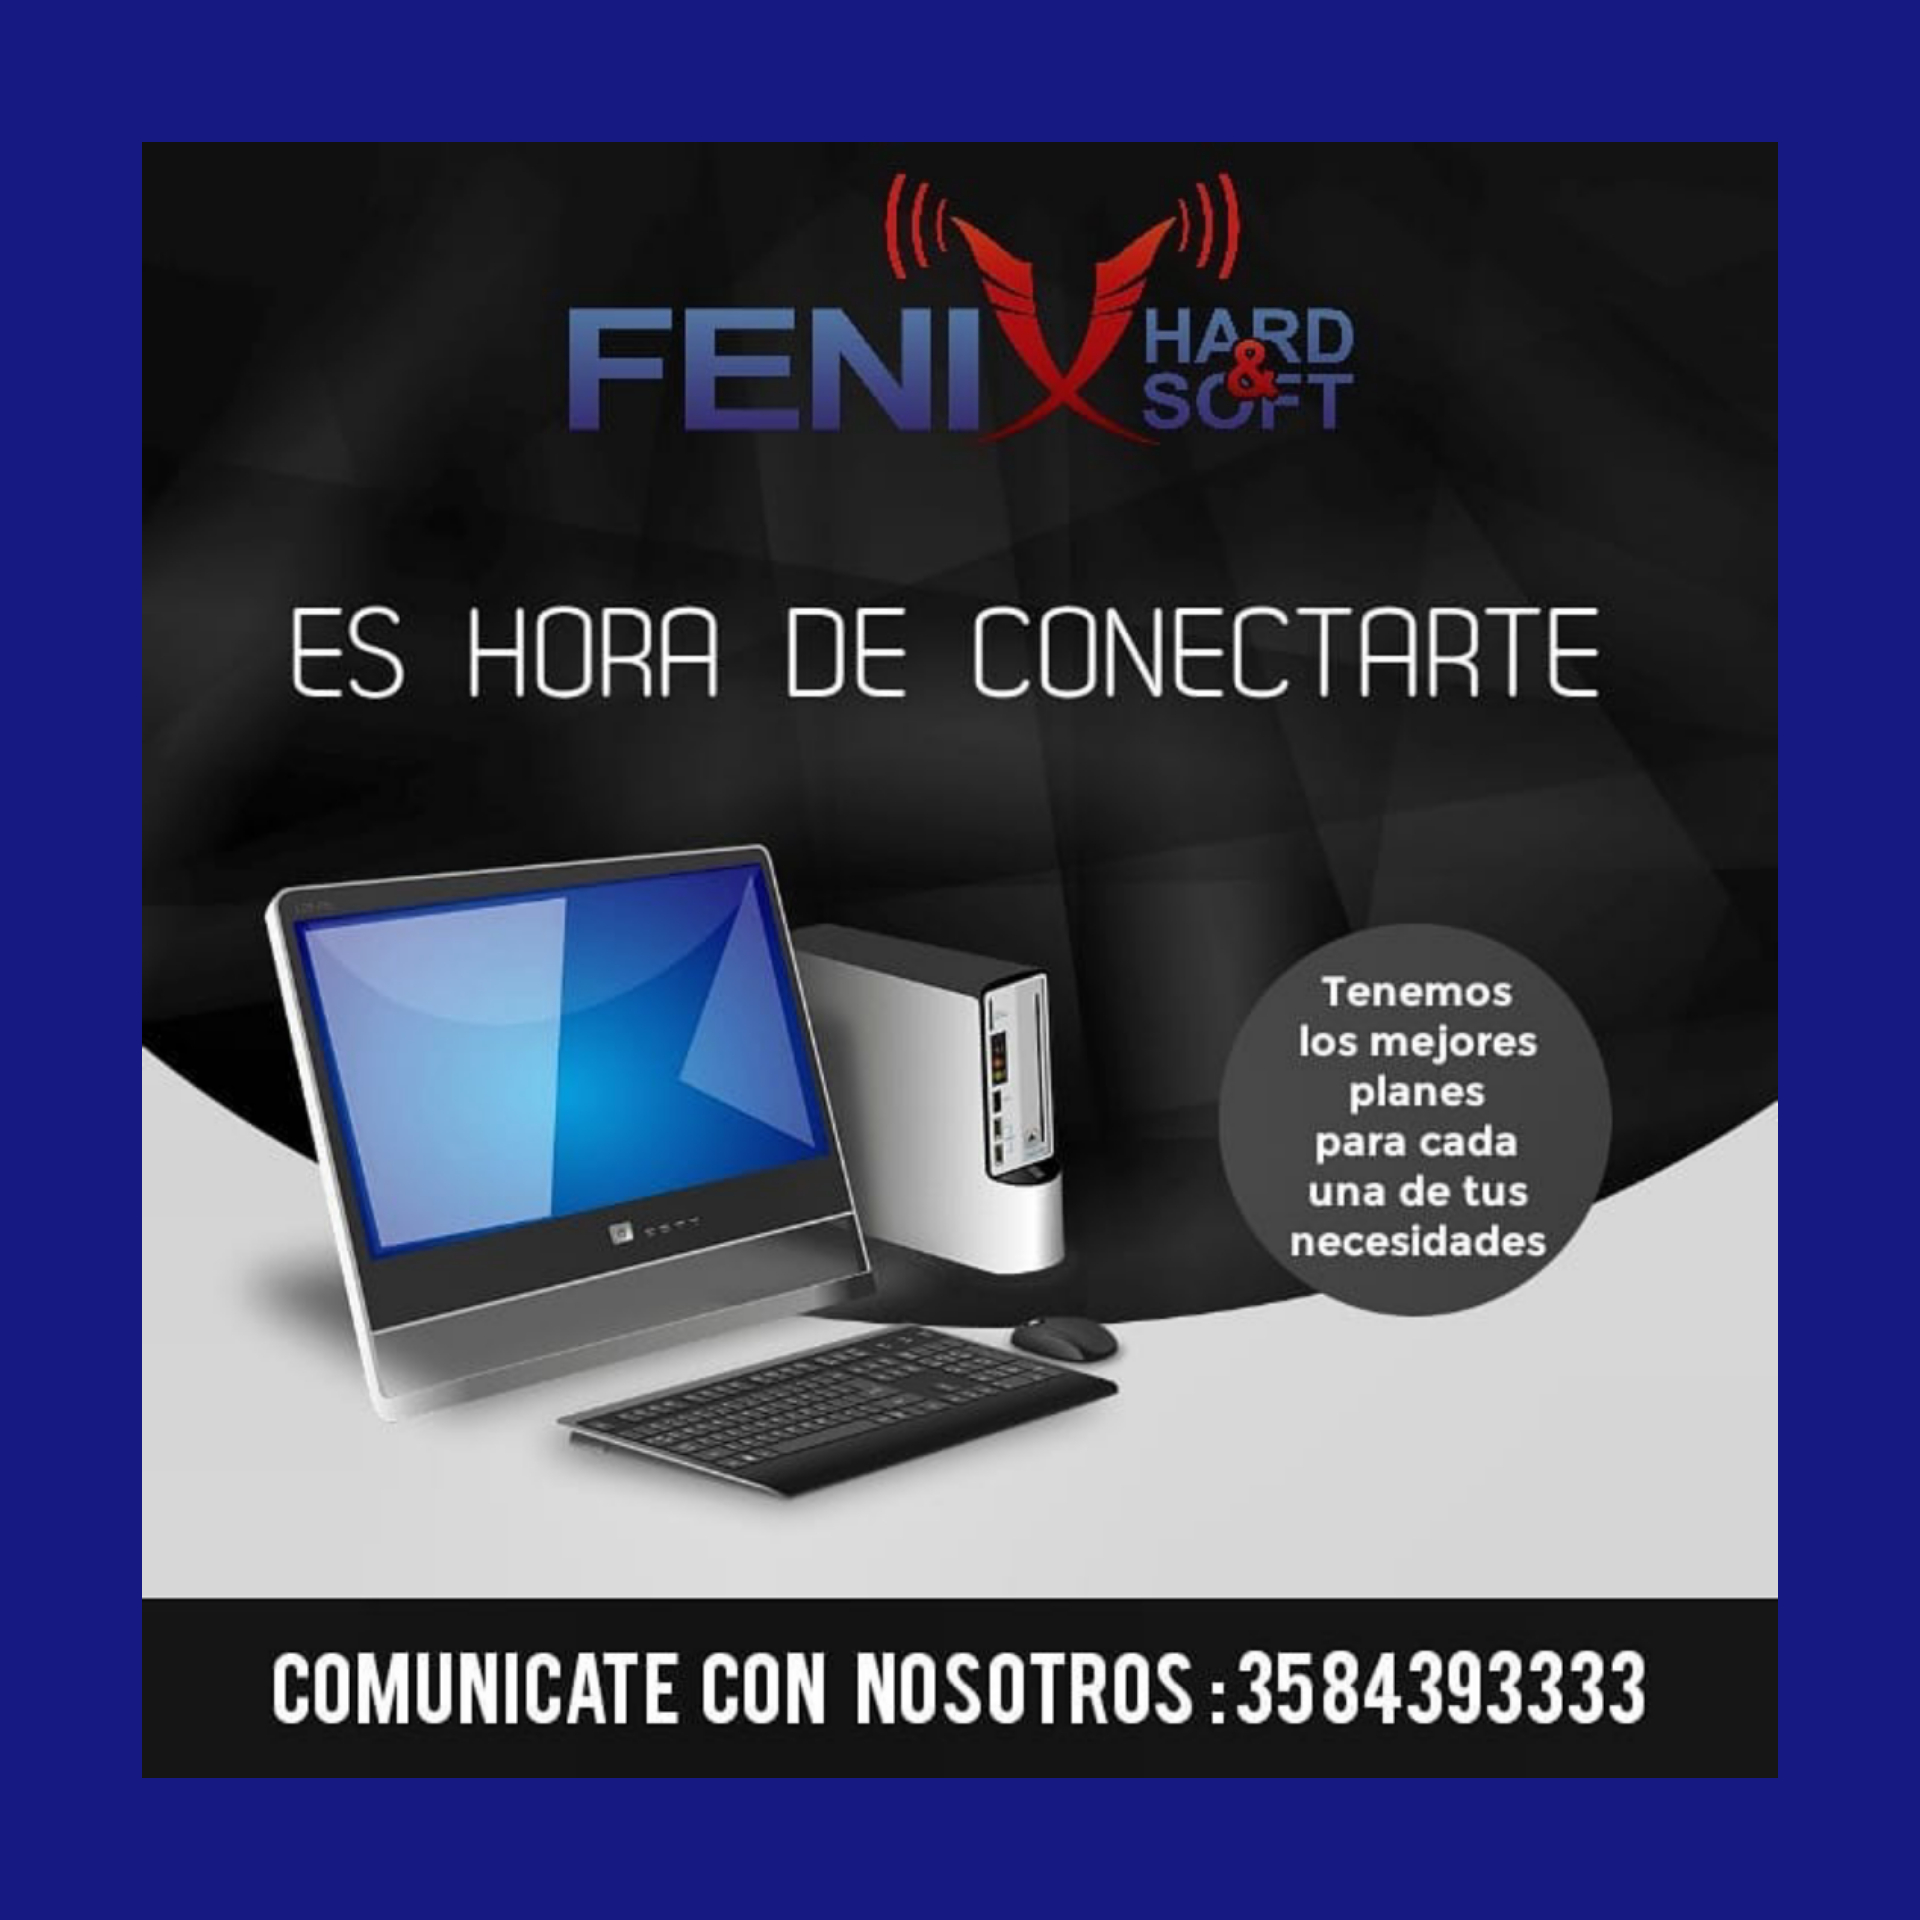 Payment fenix internet To cancell